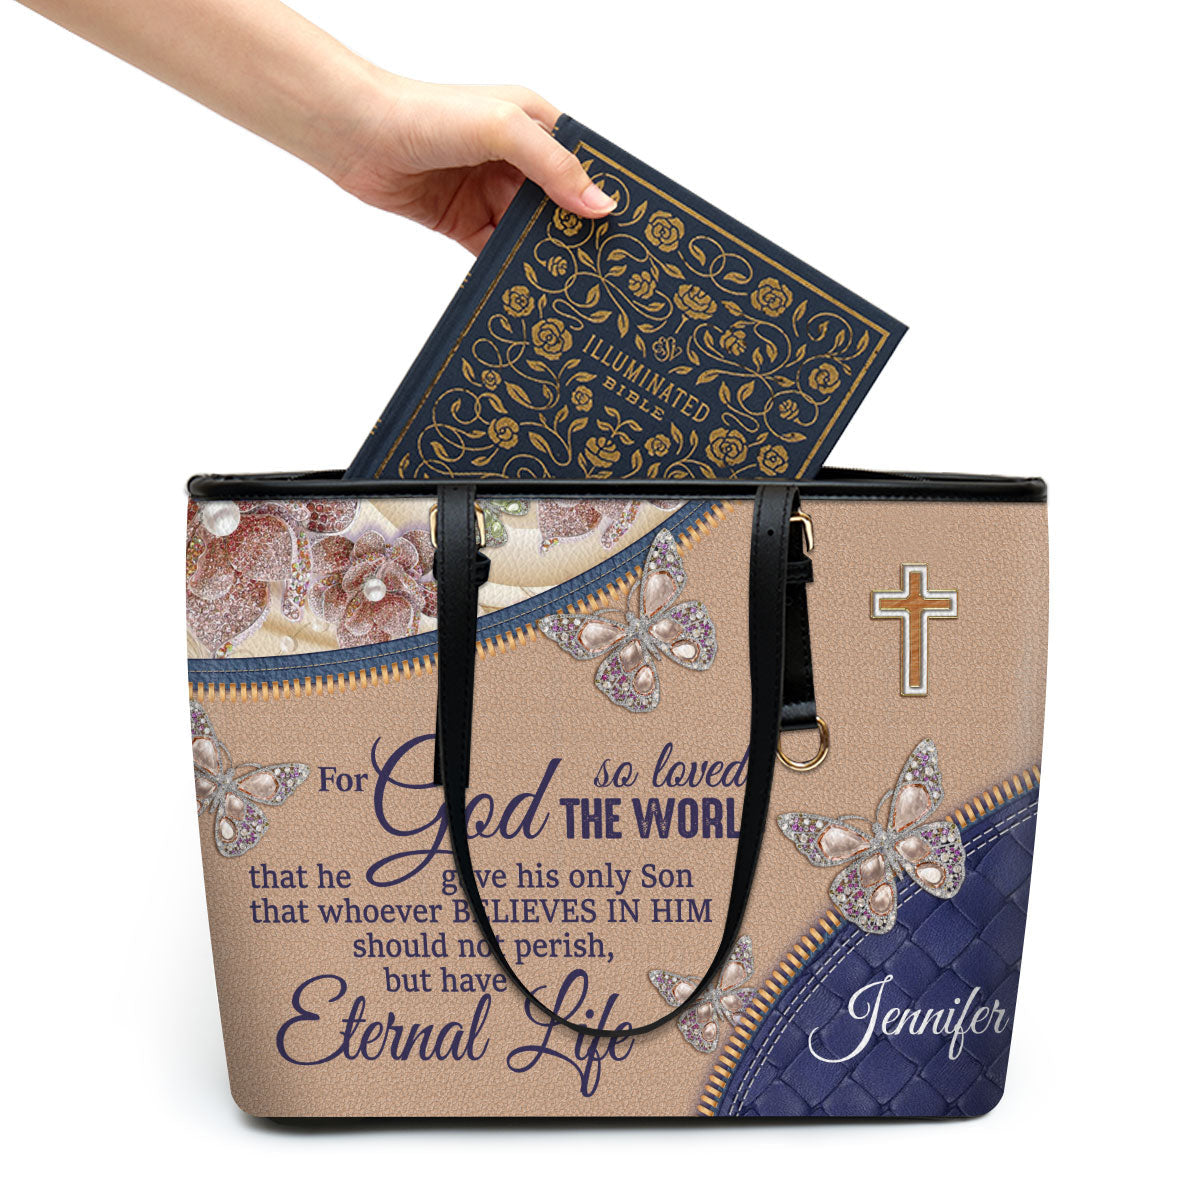 For God So Loved The World Personalized Large Leather Tote Bag - Christian Gifts For Women